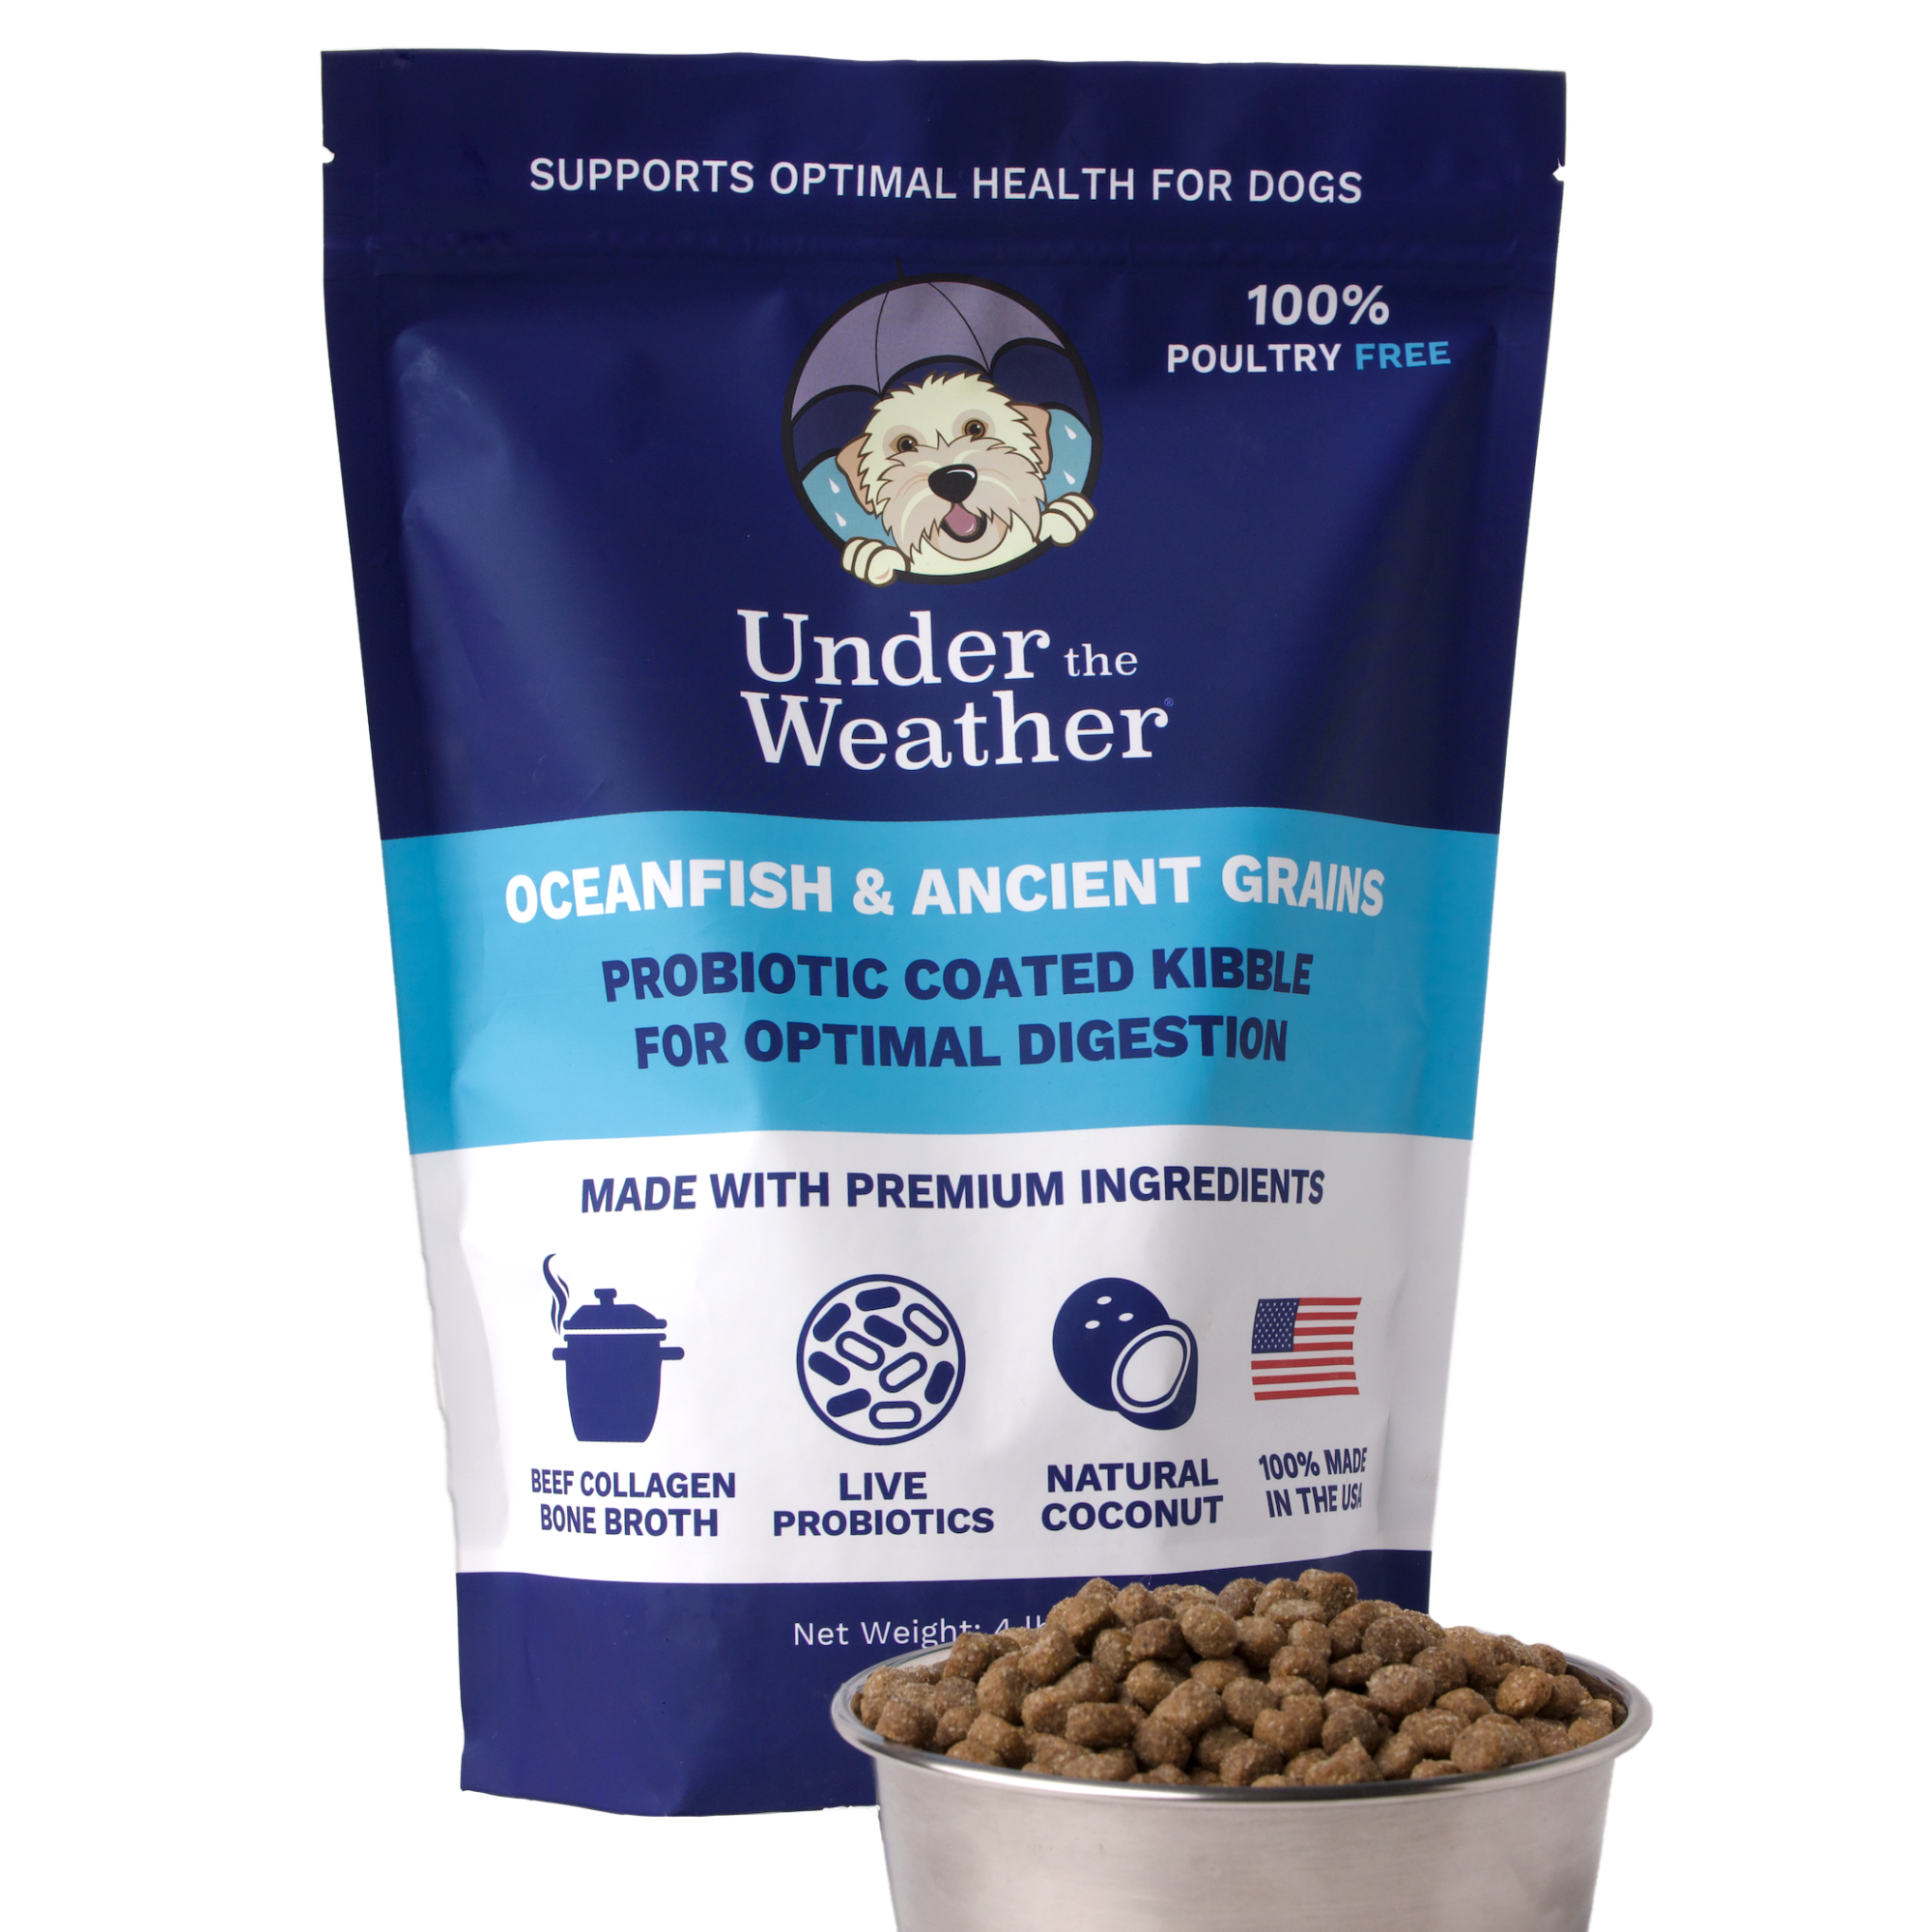 Probiotic & Bone Broth Coated Kibble For Dogs